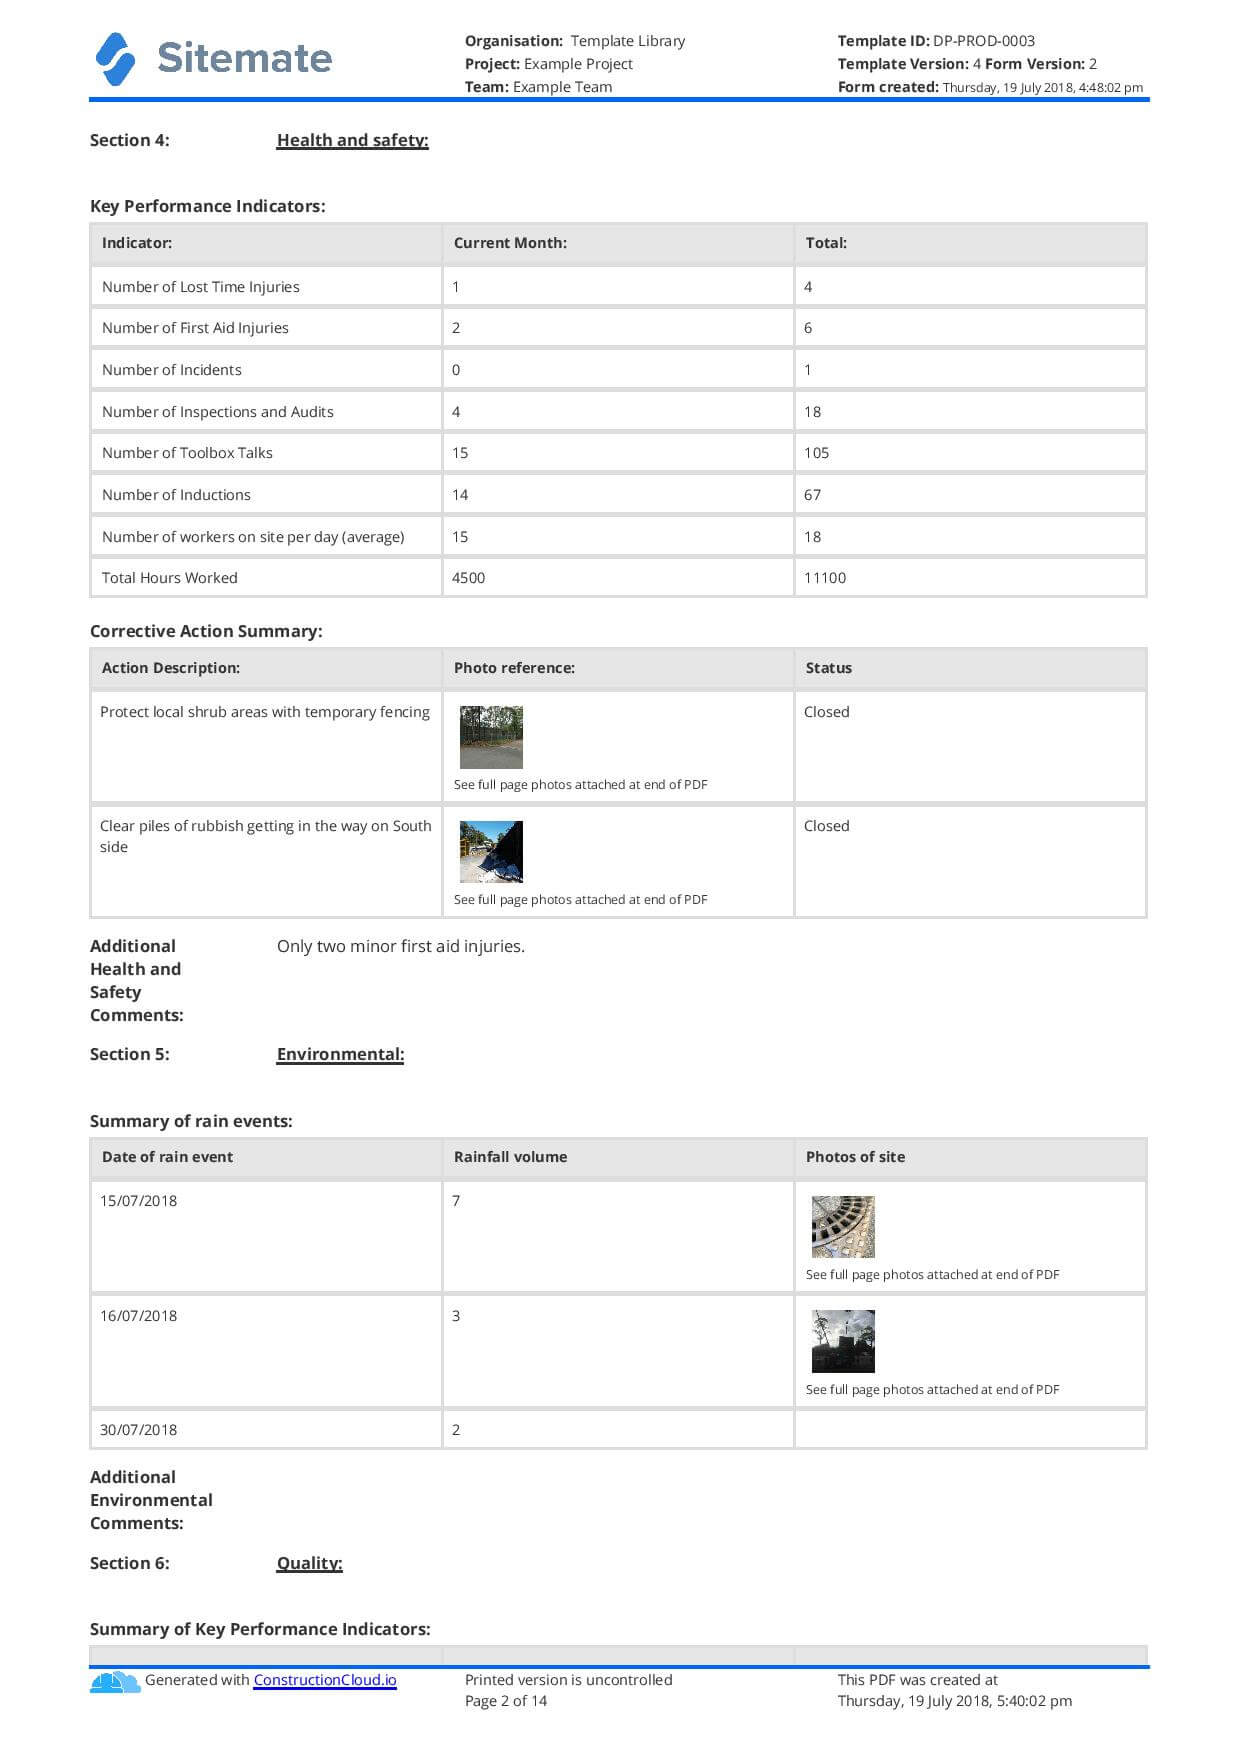 Monthly Construction Progress Report Template: Use This Within Monthly Progress Report Template